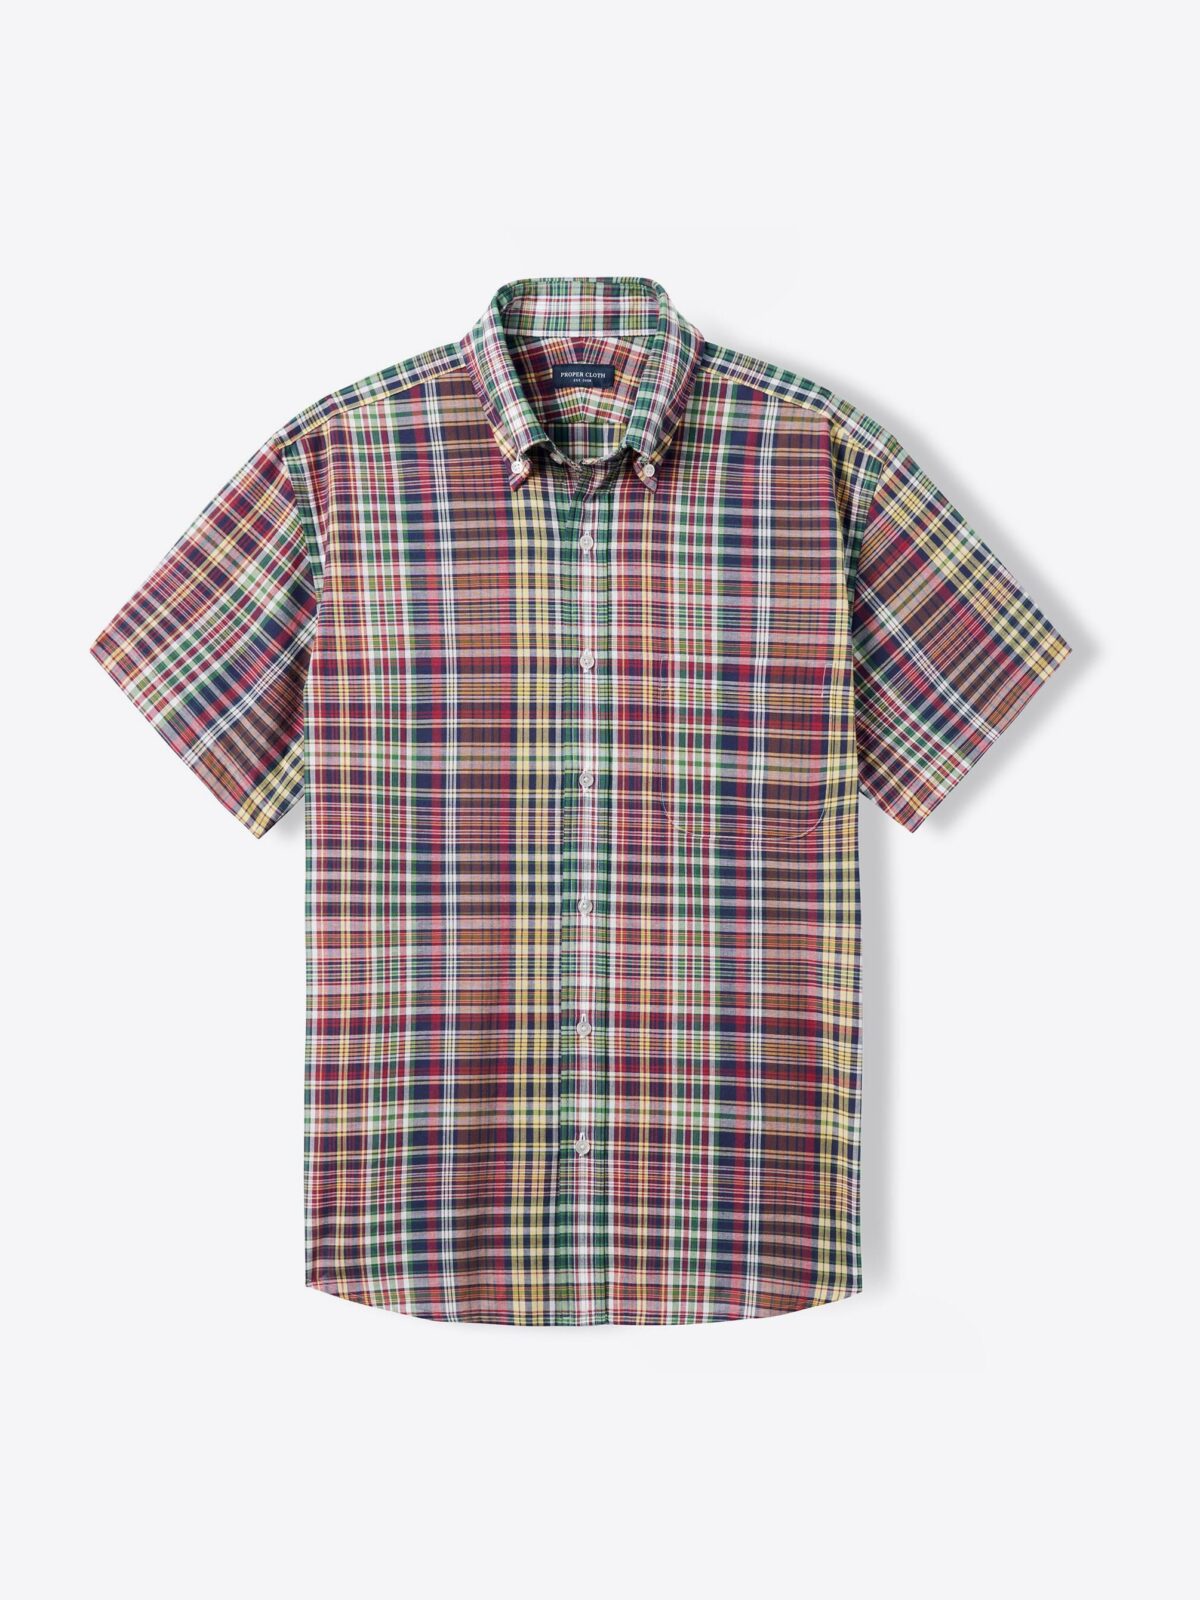 Red Brown and Green Indian Madras Shirt by Proper Cloth